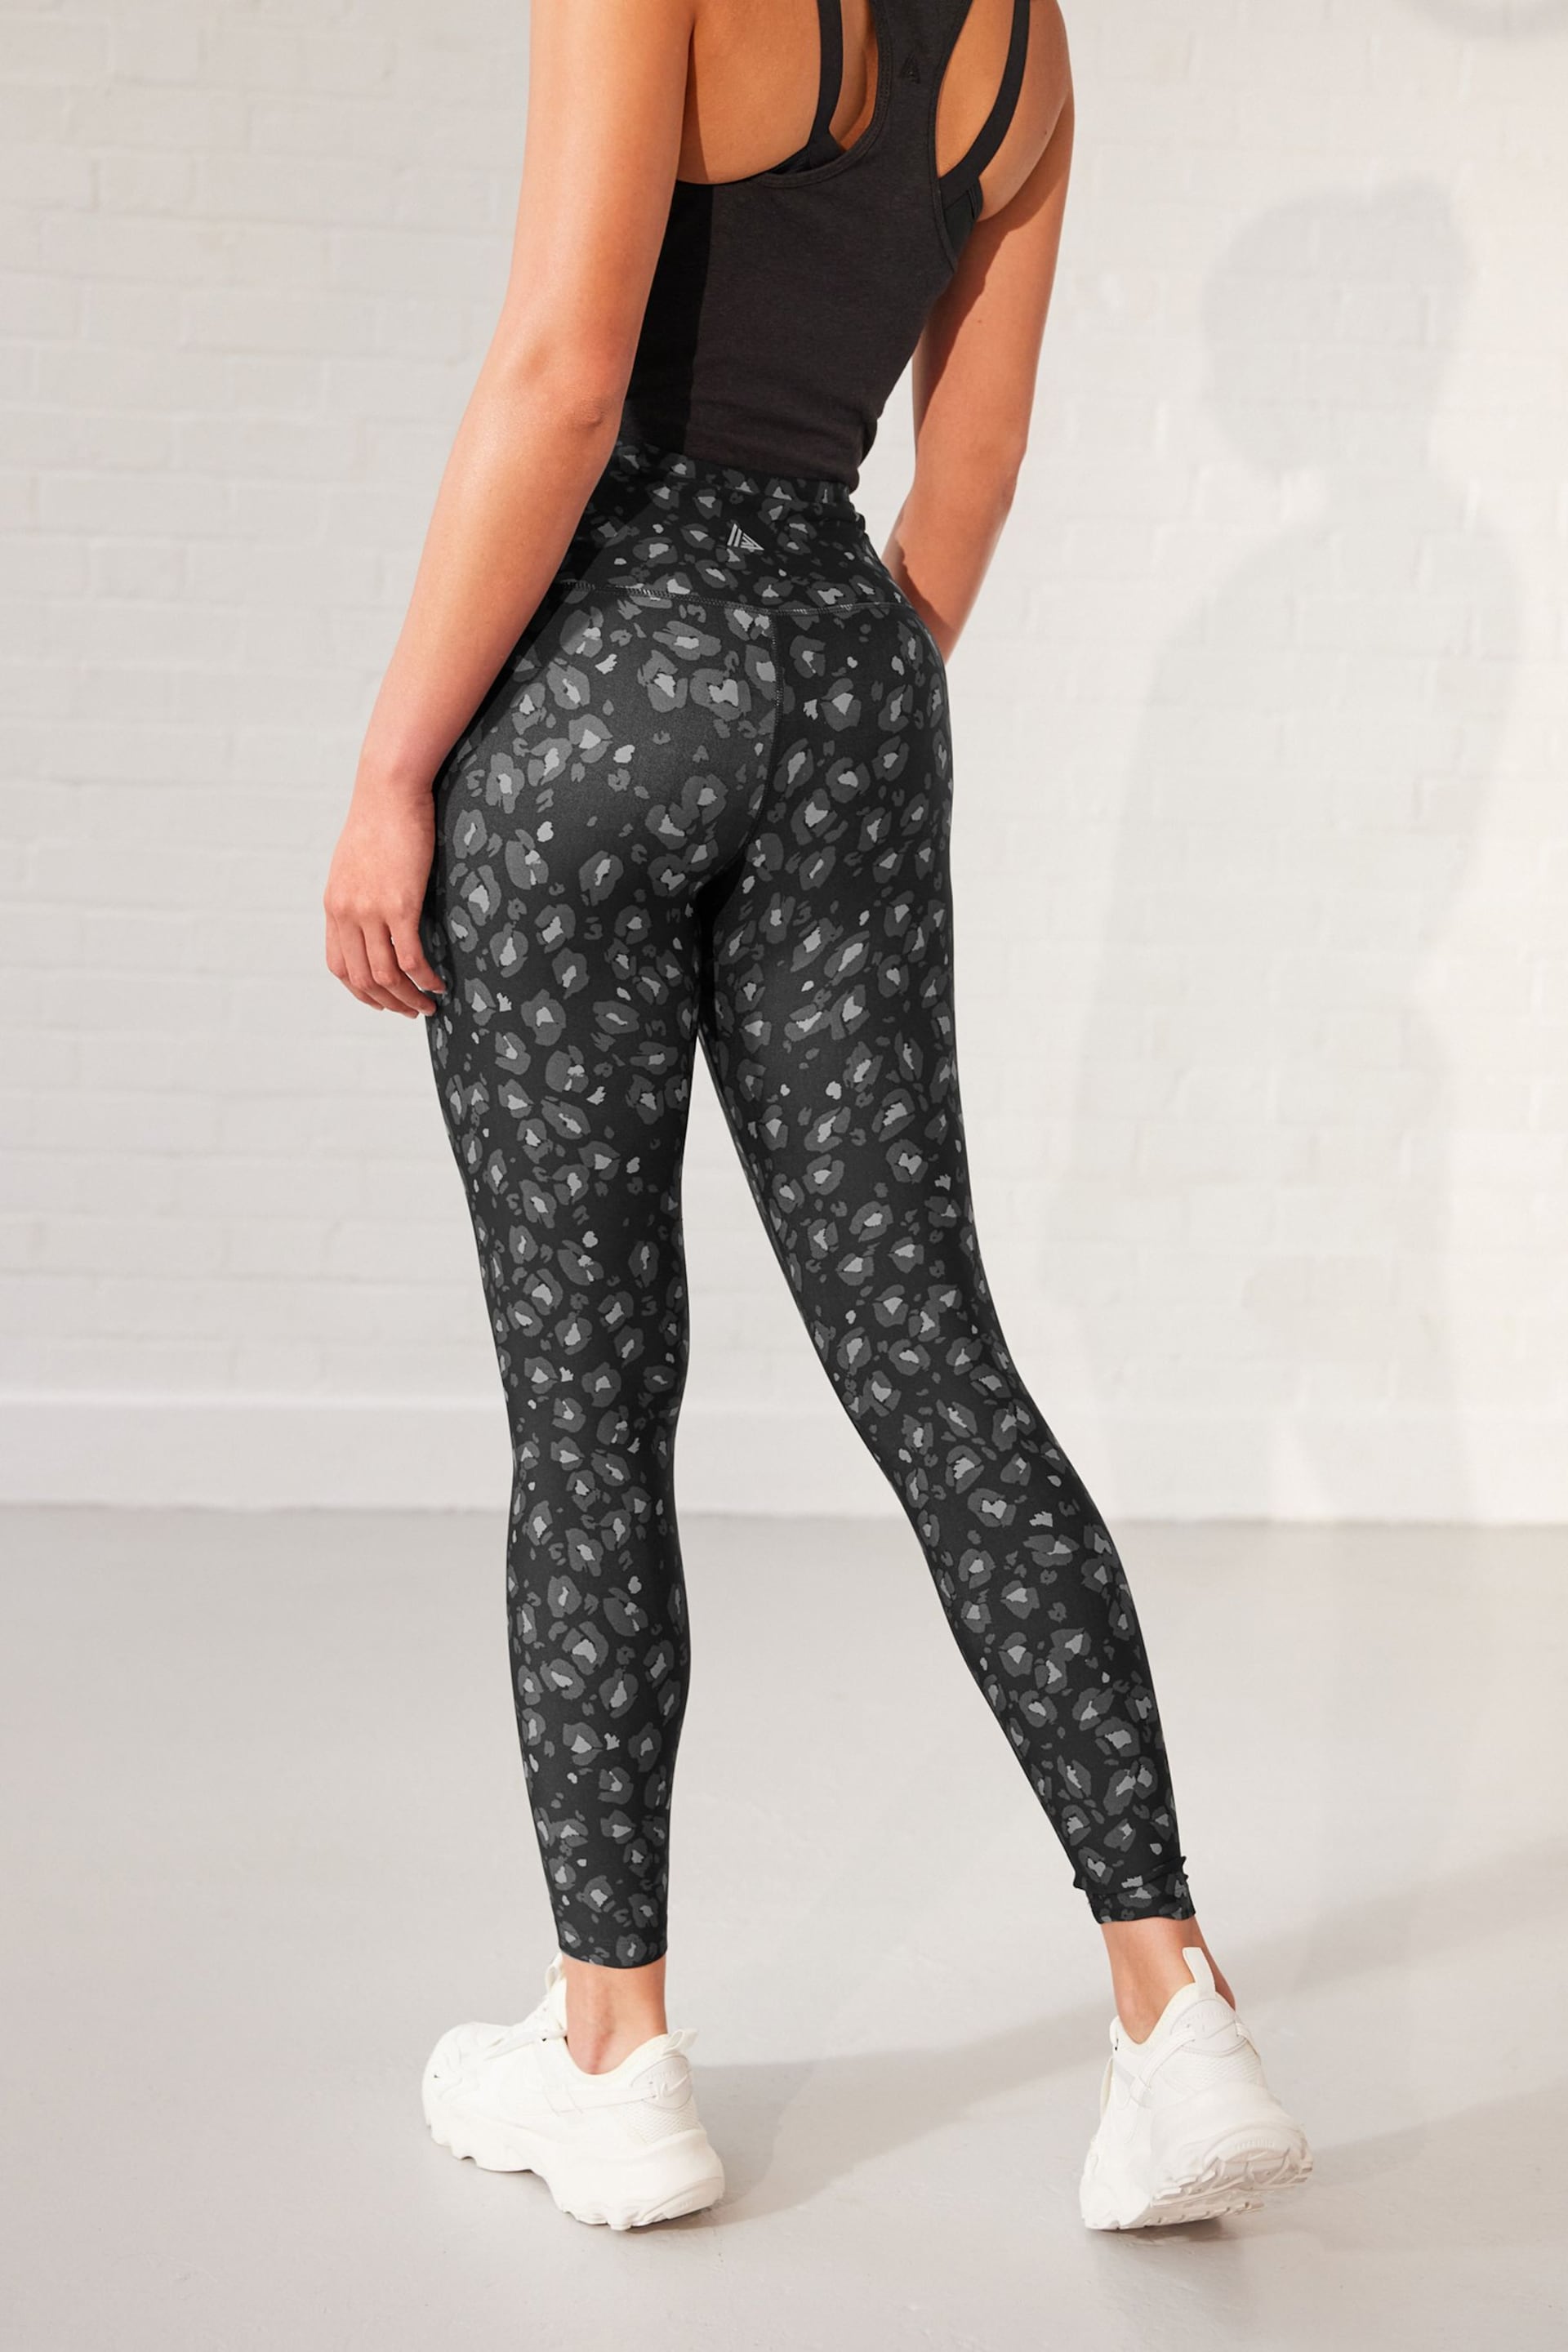 Charcoal Animal Print Active High Rise Sports Sculpting Leggings - Image 3 of 7